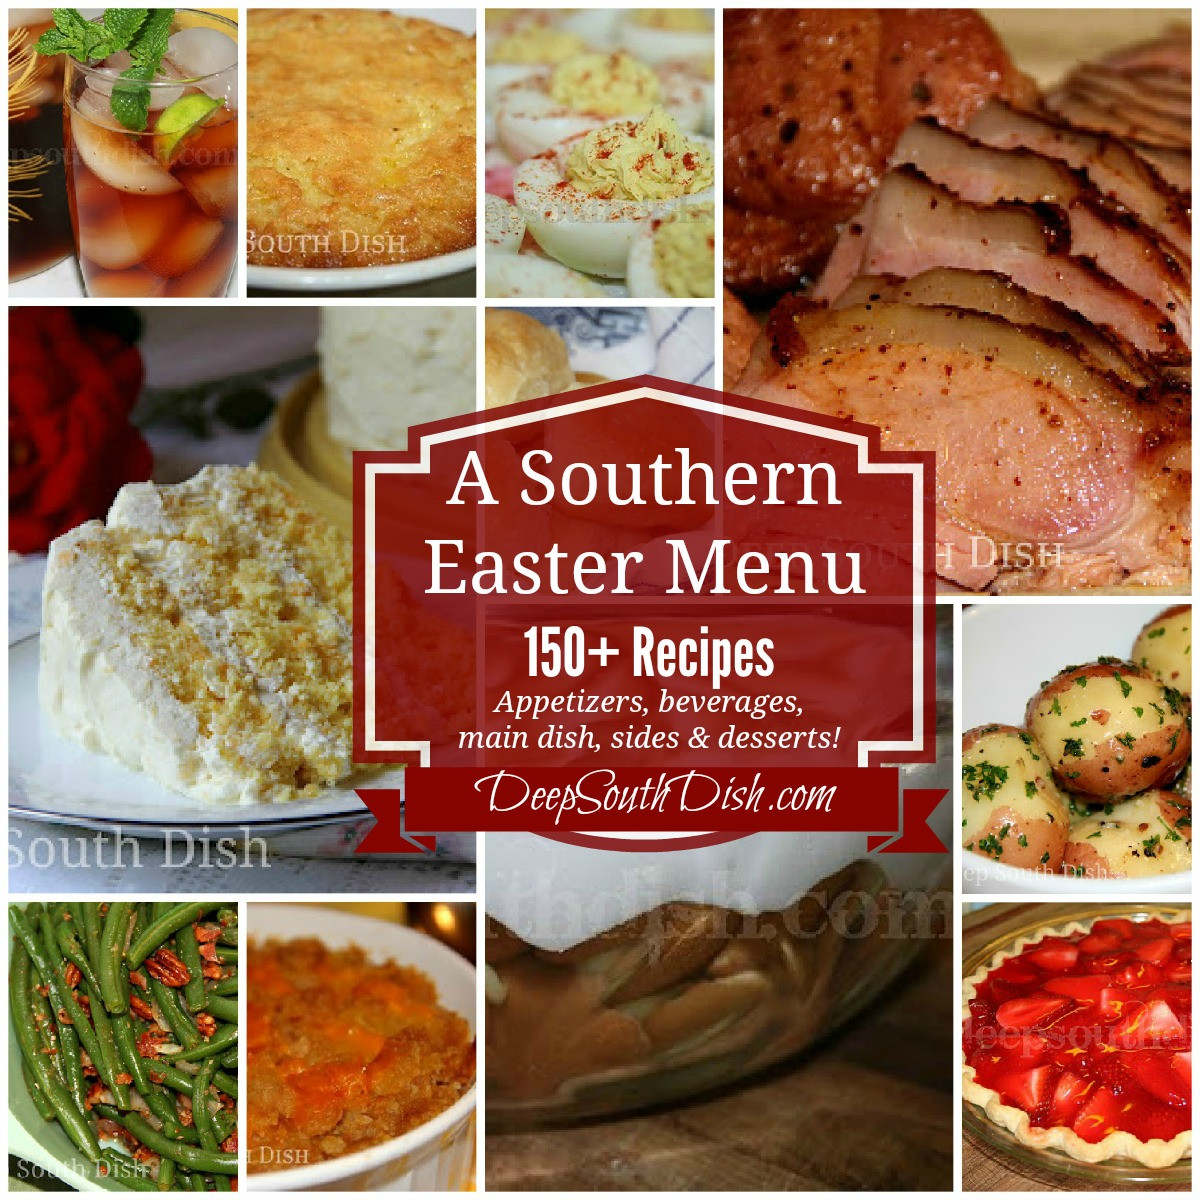 Easter Dinners Menu
 Deep South Dish Southern Easter Menu Ideas and Recipes